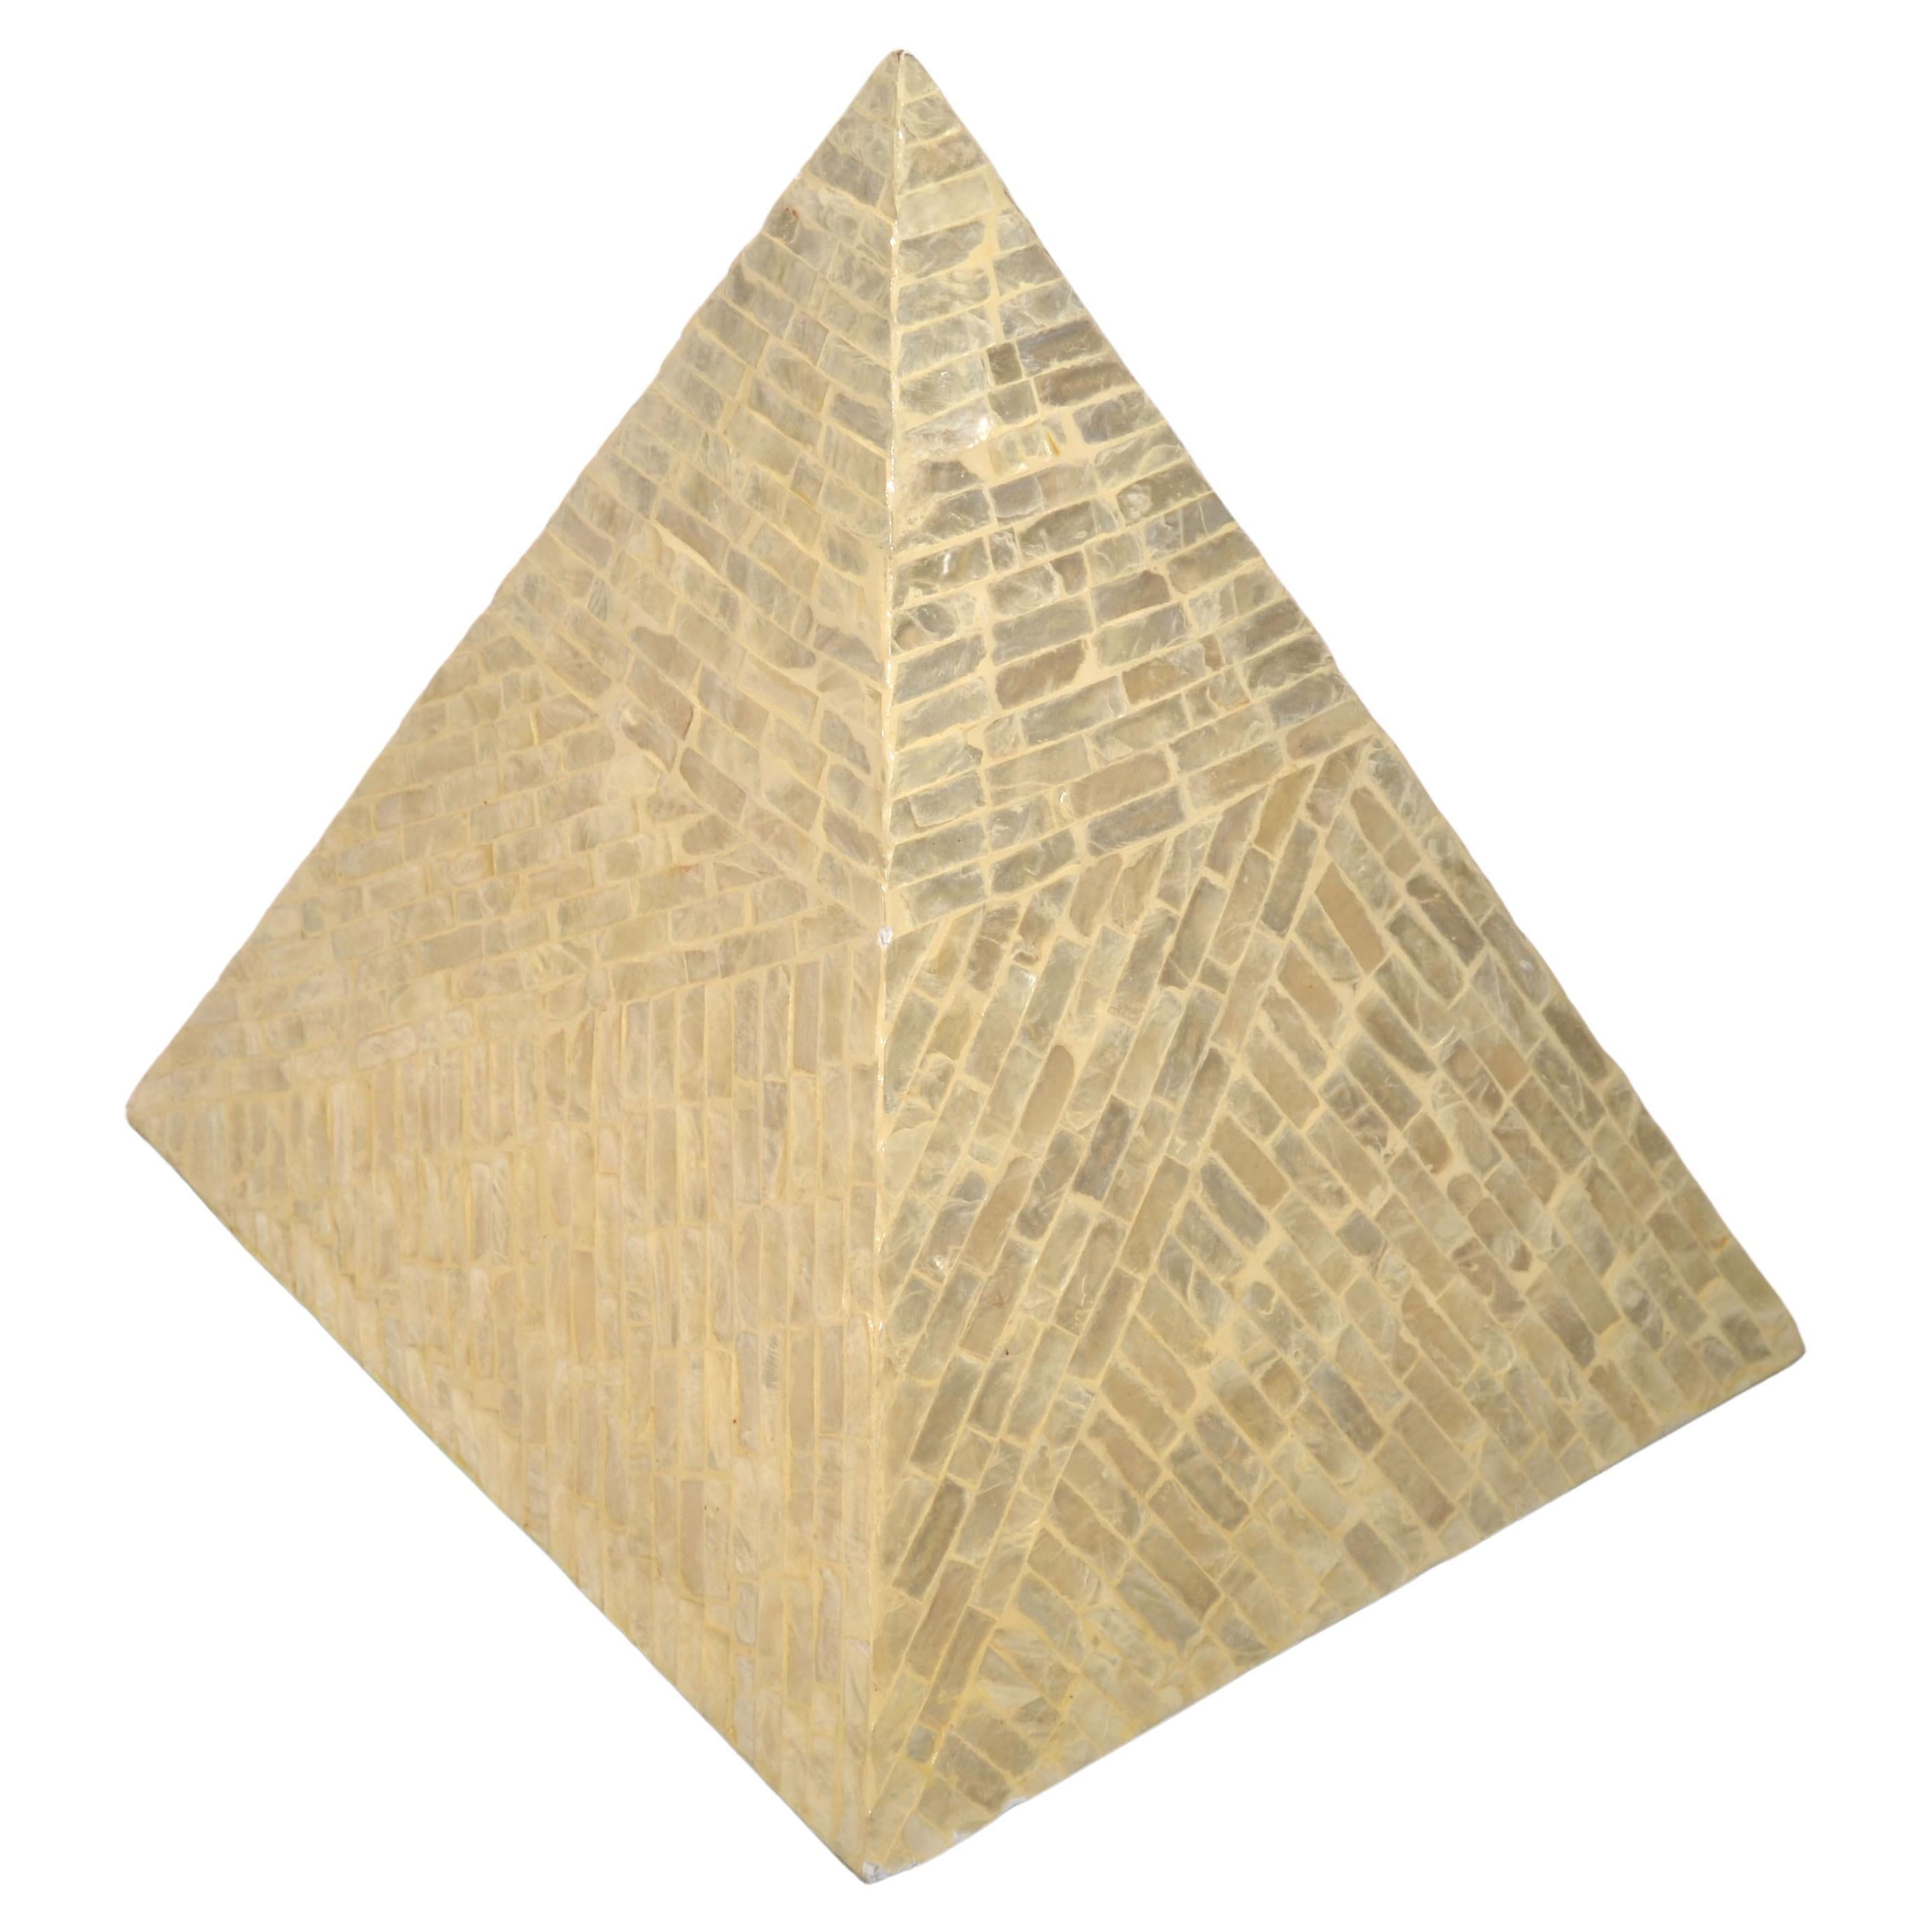 Arts And Crafts Periode Italian Pyramid made out of pieces polished Mother of Pearl shells over wood Sculpture.
Reflects the light in a warm and elegant shimmer.
Beautiful crafted with matricular craftsmanship. 
In good vintage condition with a